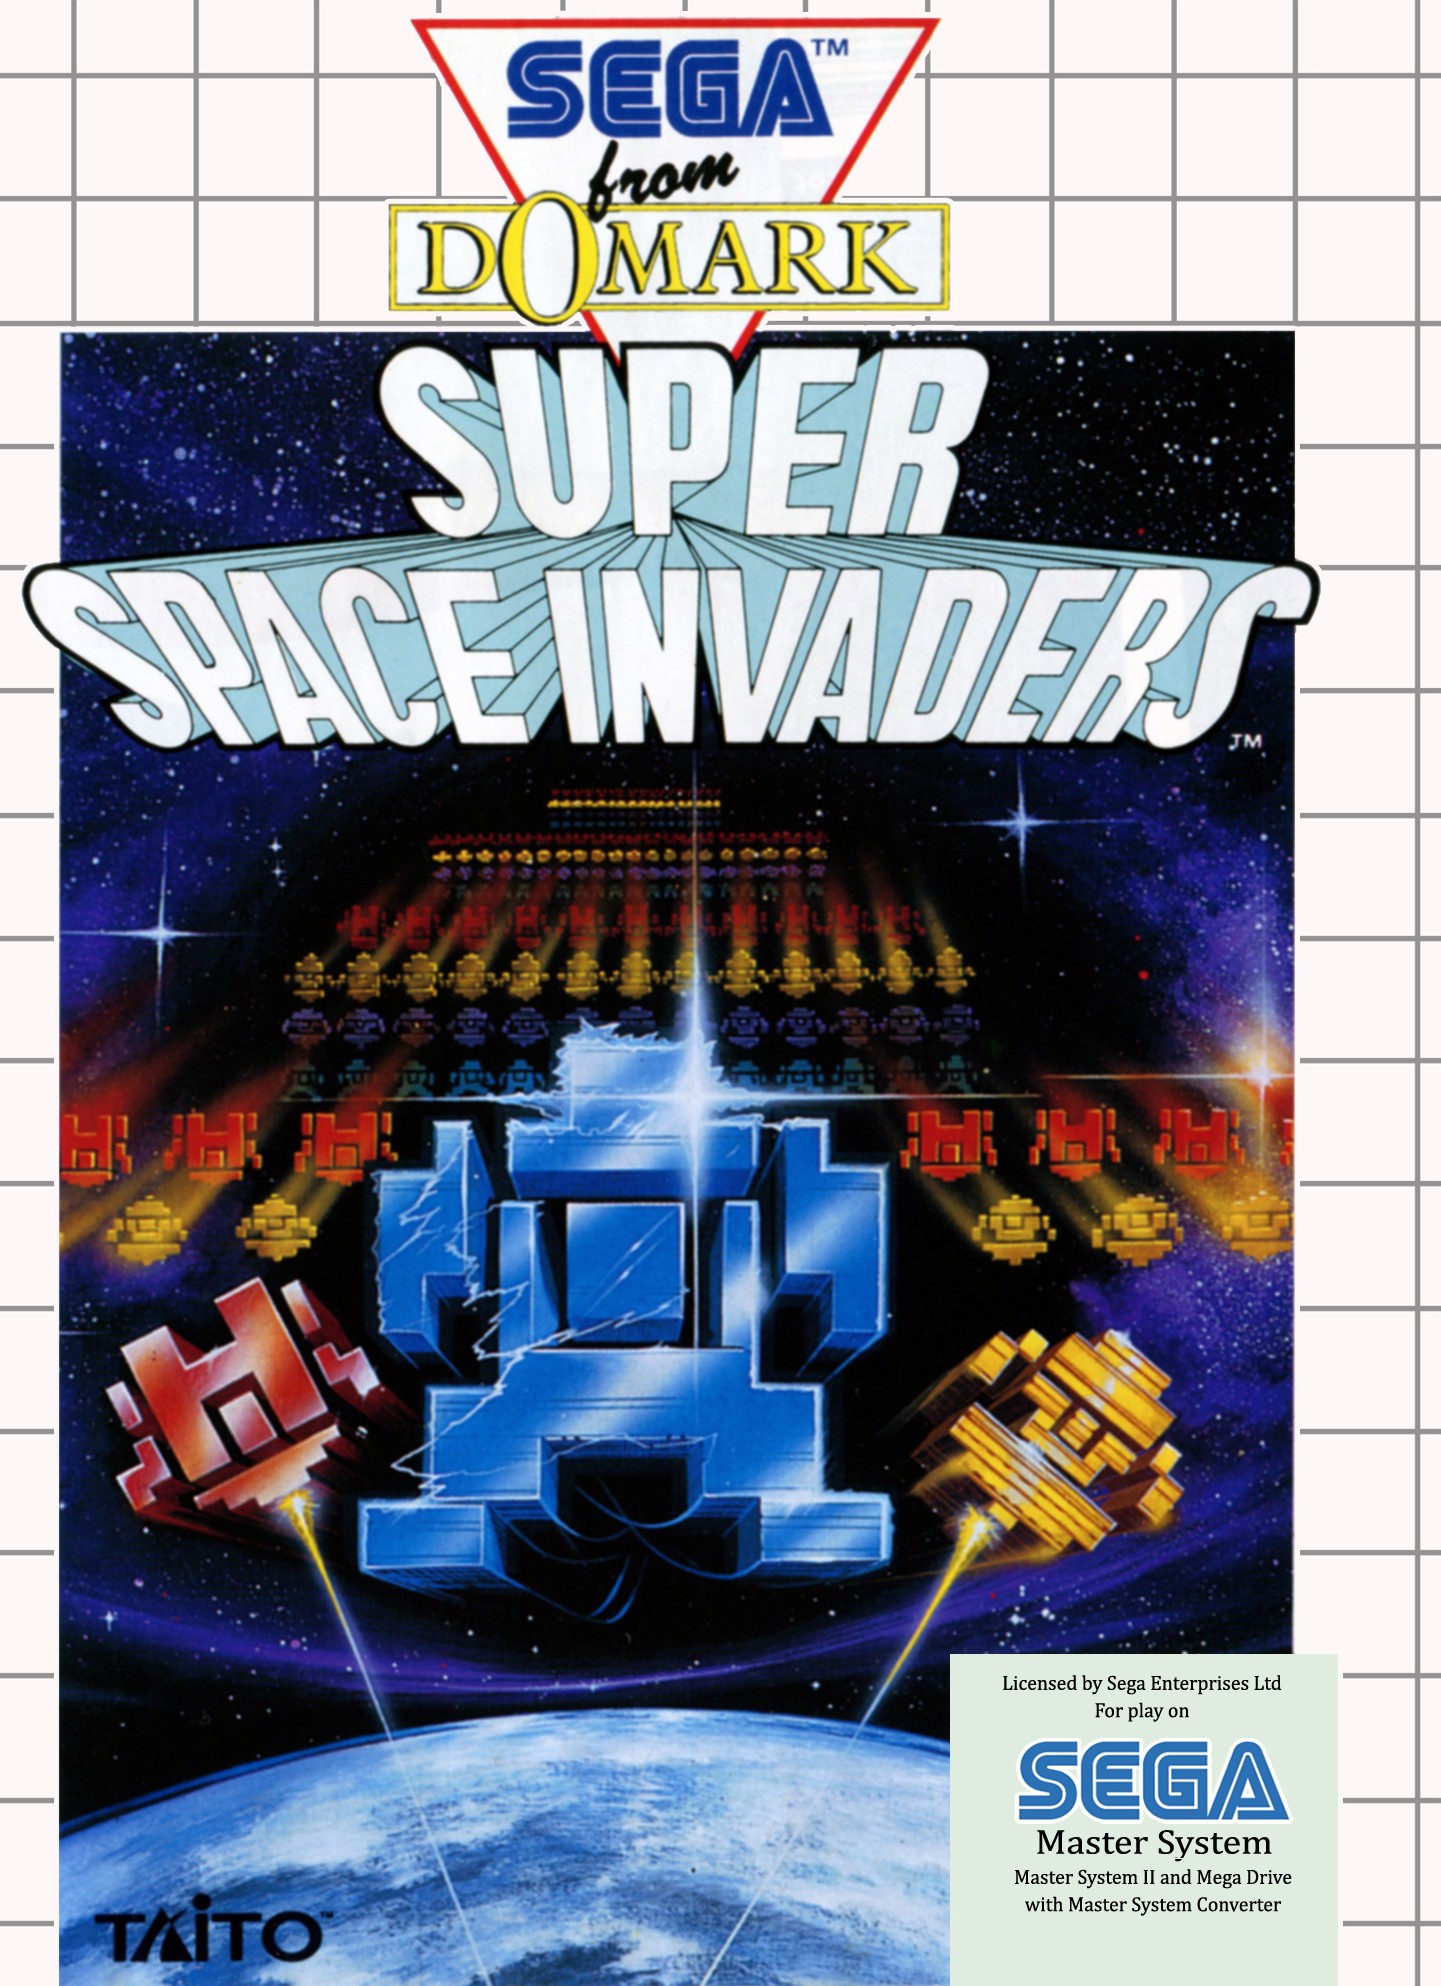 'Space invaders'